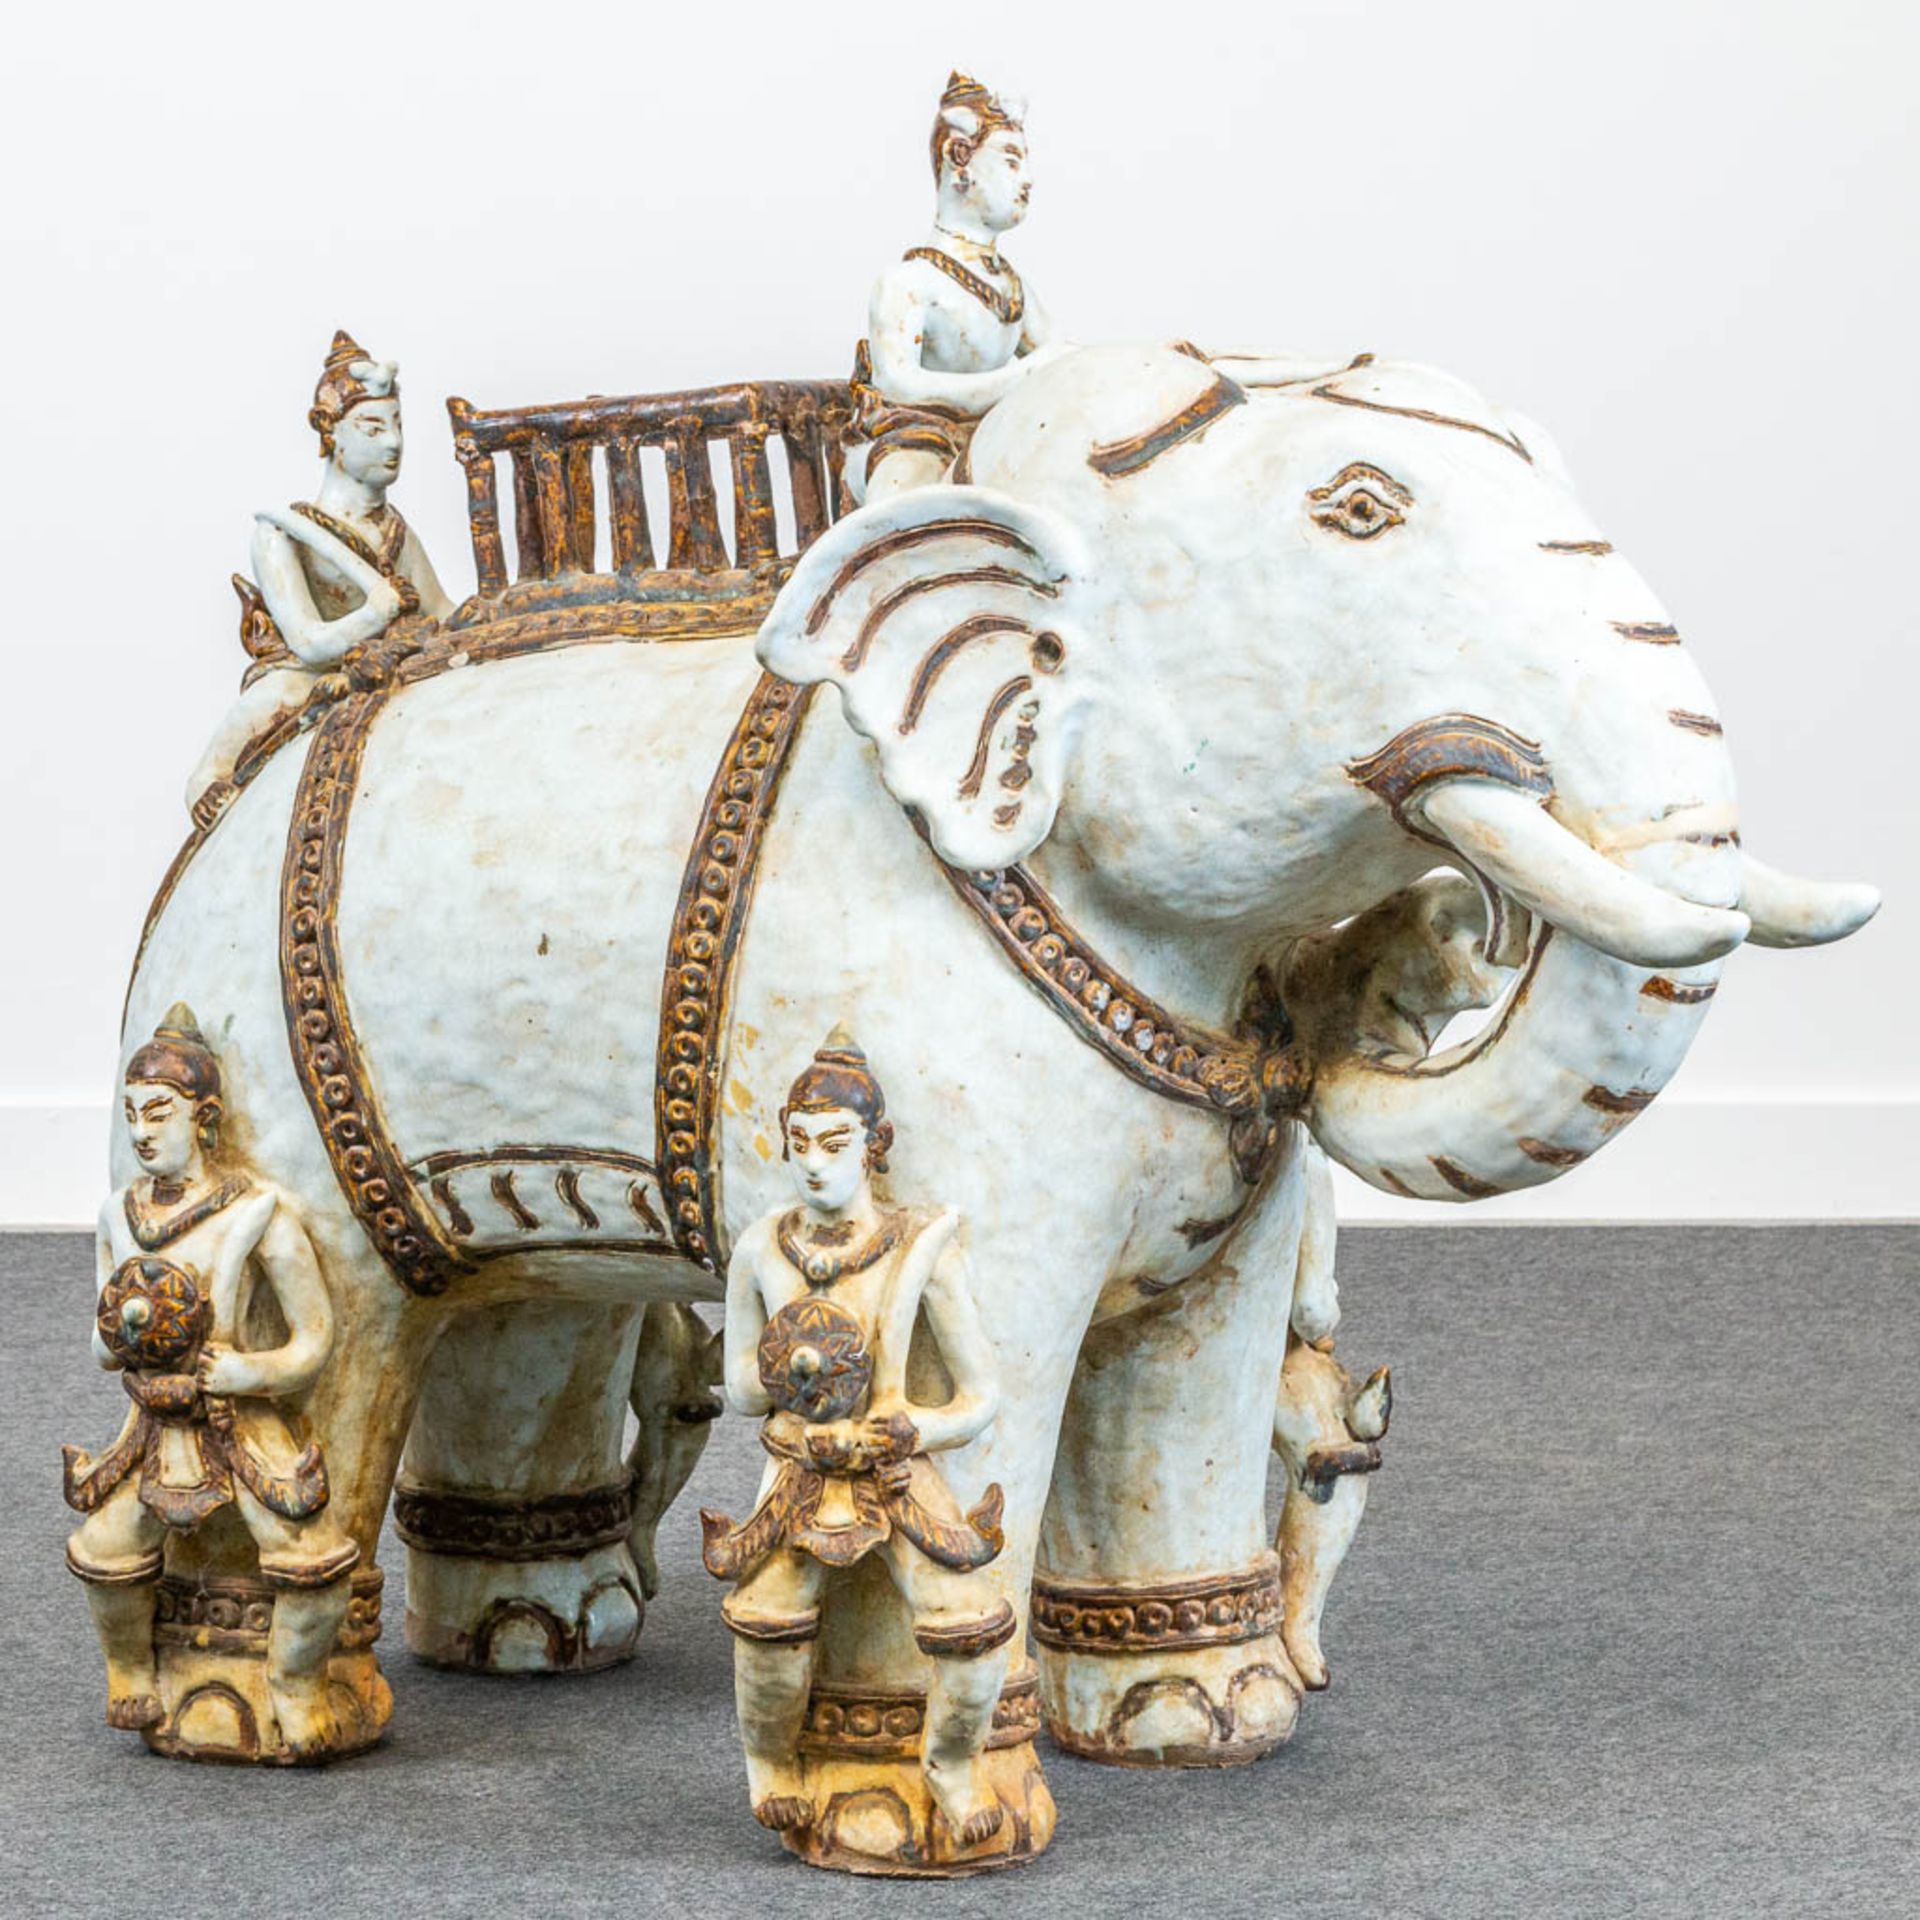 A ceramic statue of an elephant, probably made in Birma. (33 x 73 x 65 cm) - Image 9 of 11